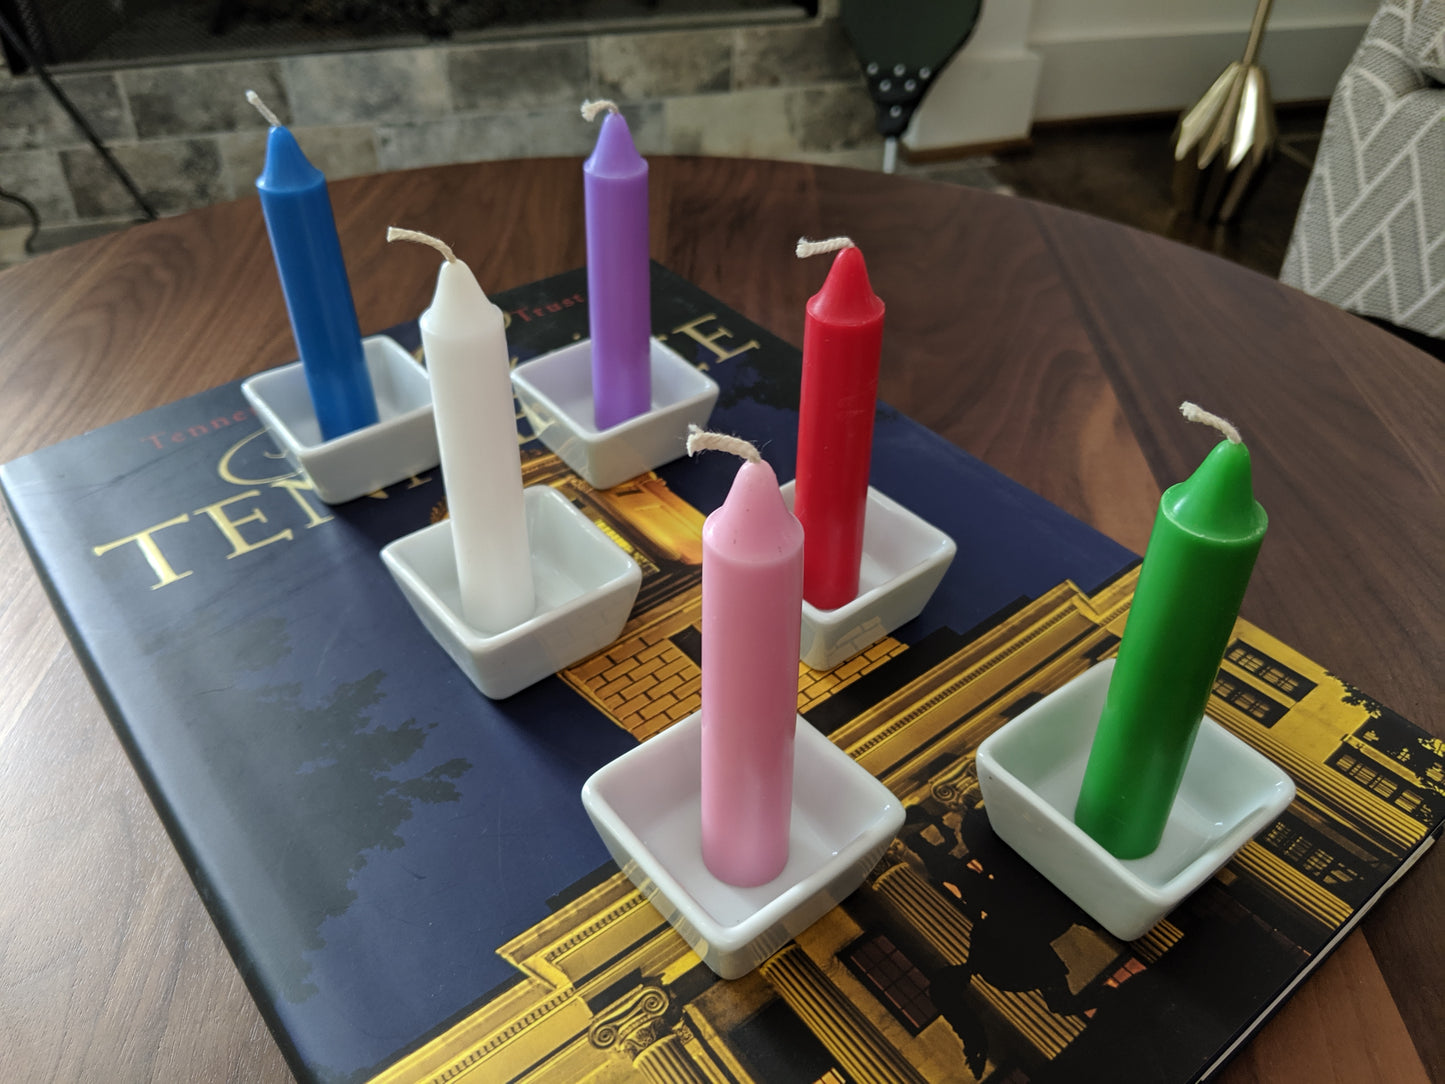 Close up image, multi colored candles displayed on coffee table.